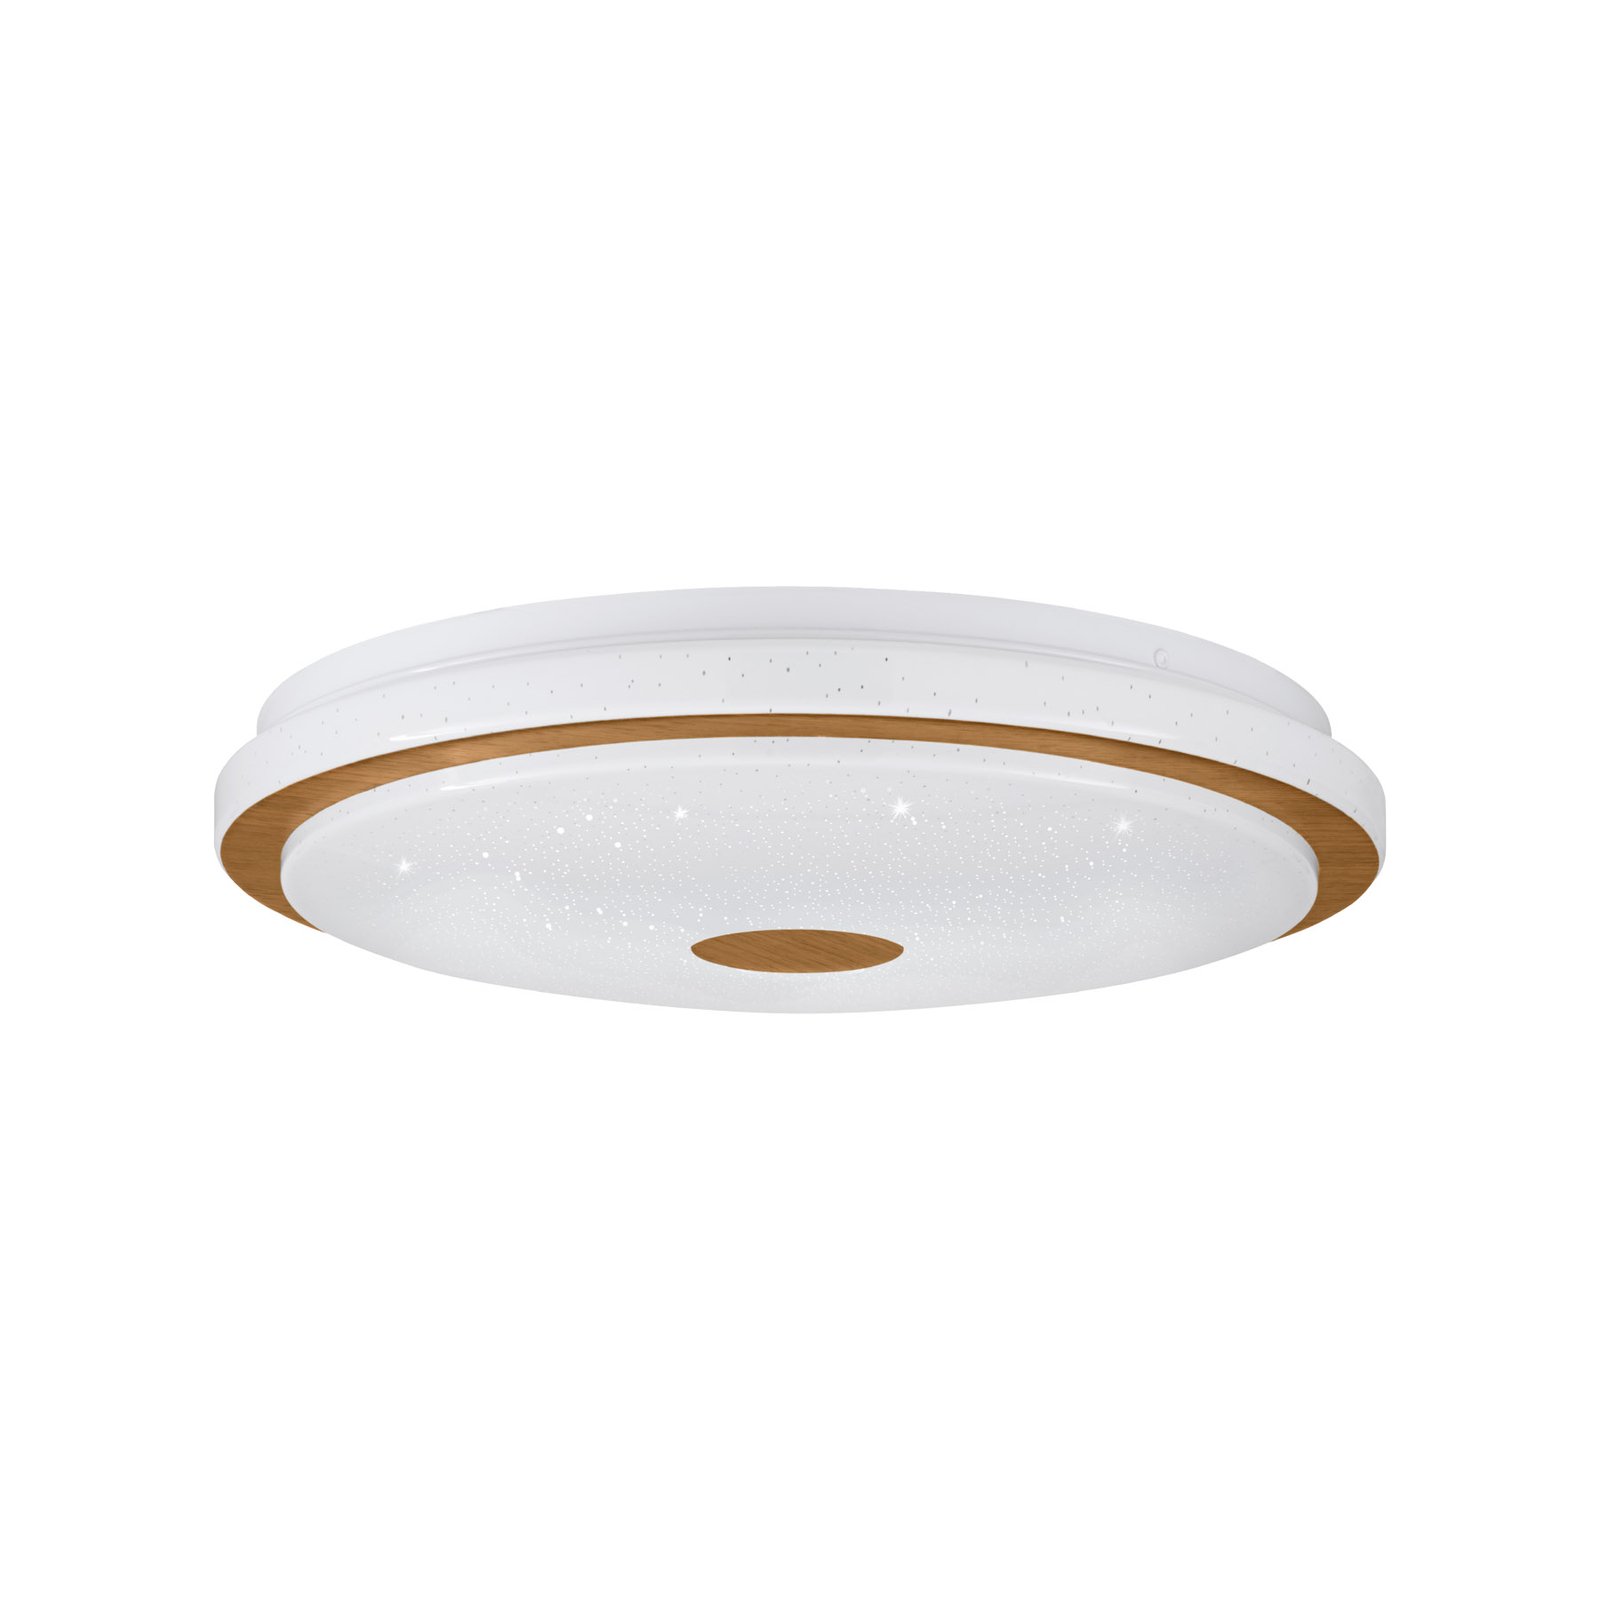 Lanciano 1 LED ceiling lamp remote control Ø 38 cm